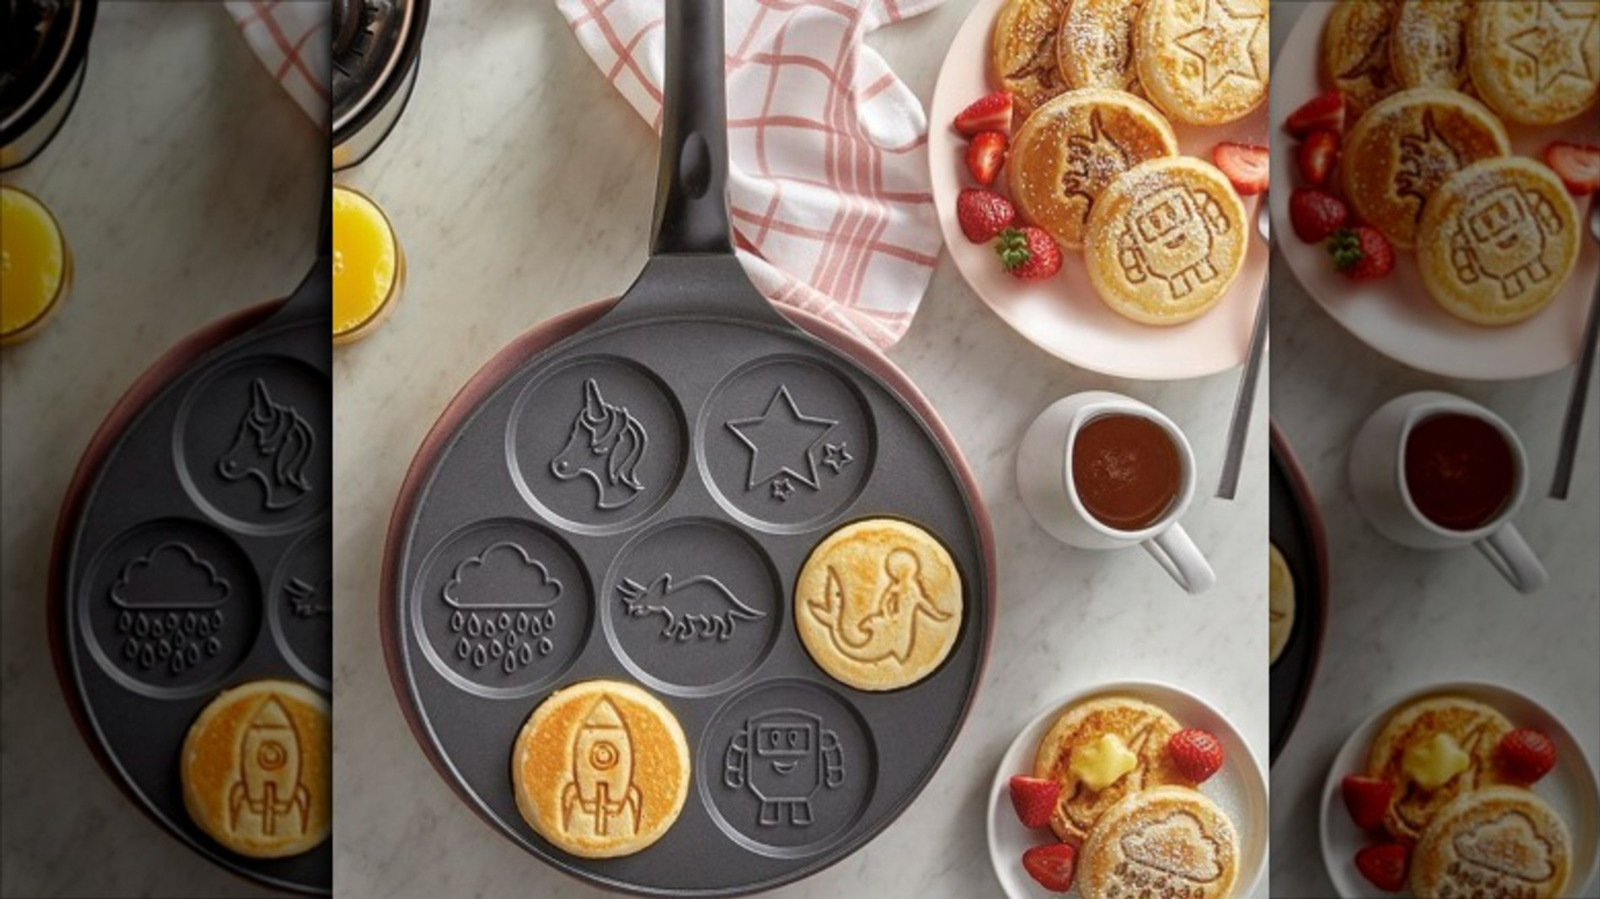 https://www.mashed.com/img/gallery/aldi-shoppers-are-excited-for-these-zany-pancake-pans/l-intro-1615921278.jpg